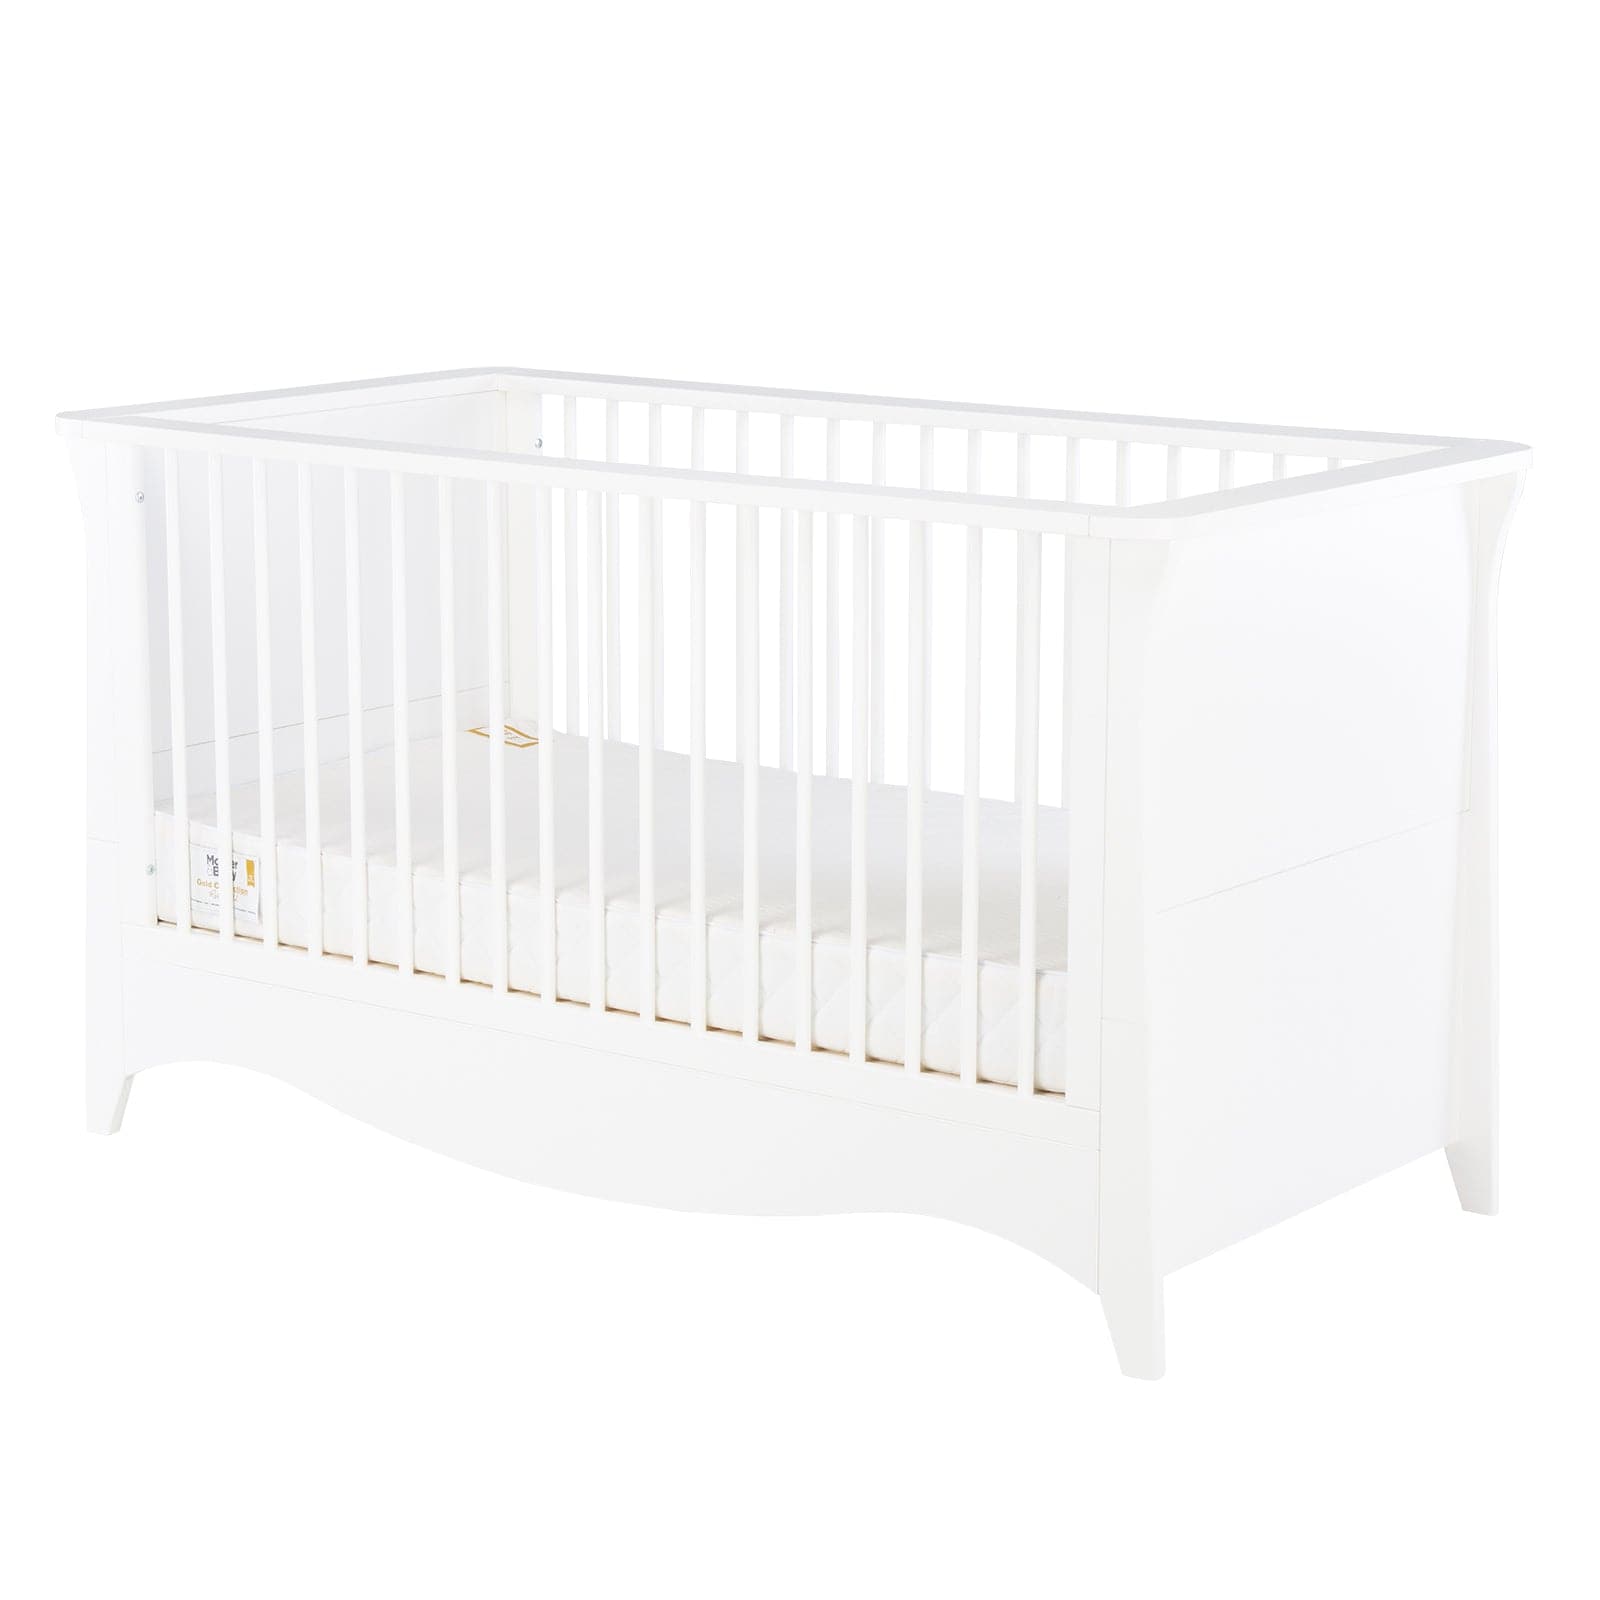 Cuddleco Clara 3 Piece Nursery Furniture Set - White -  | For Your Little One